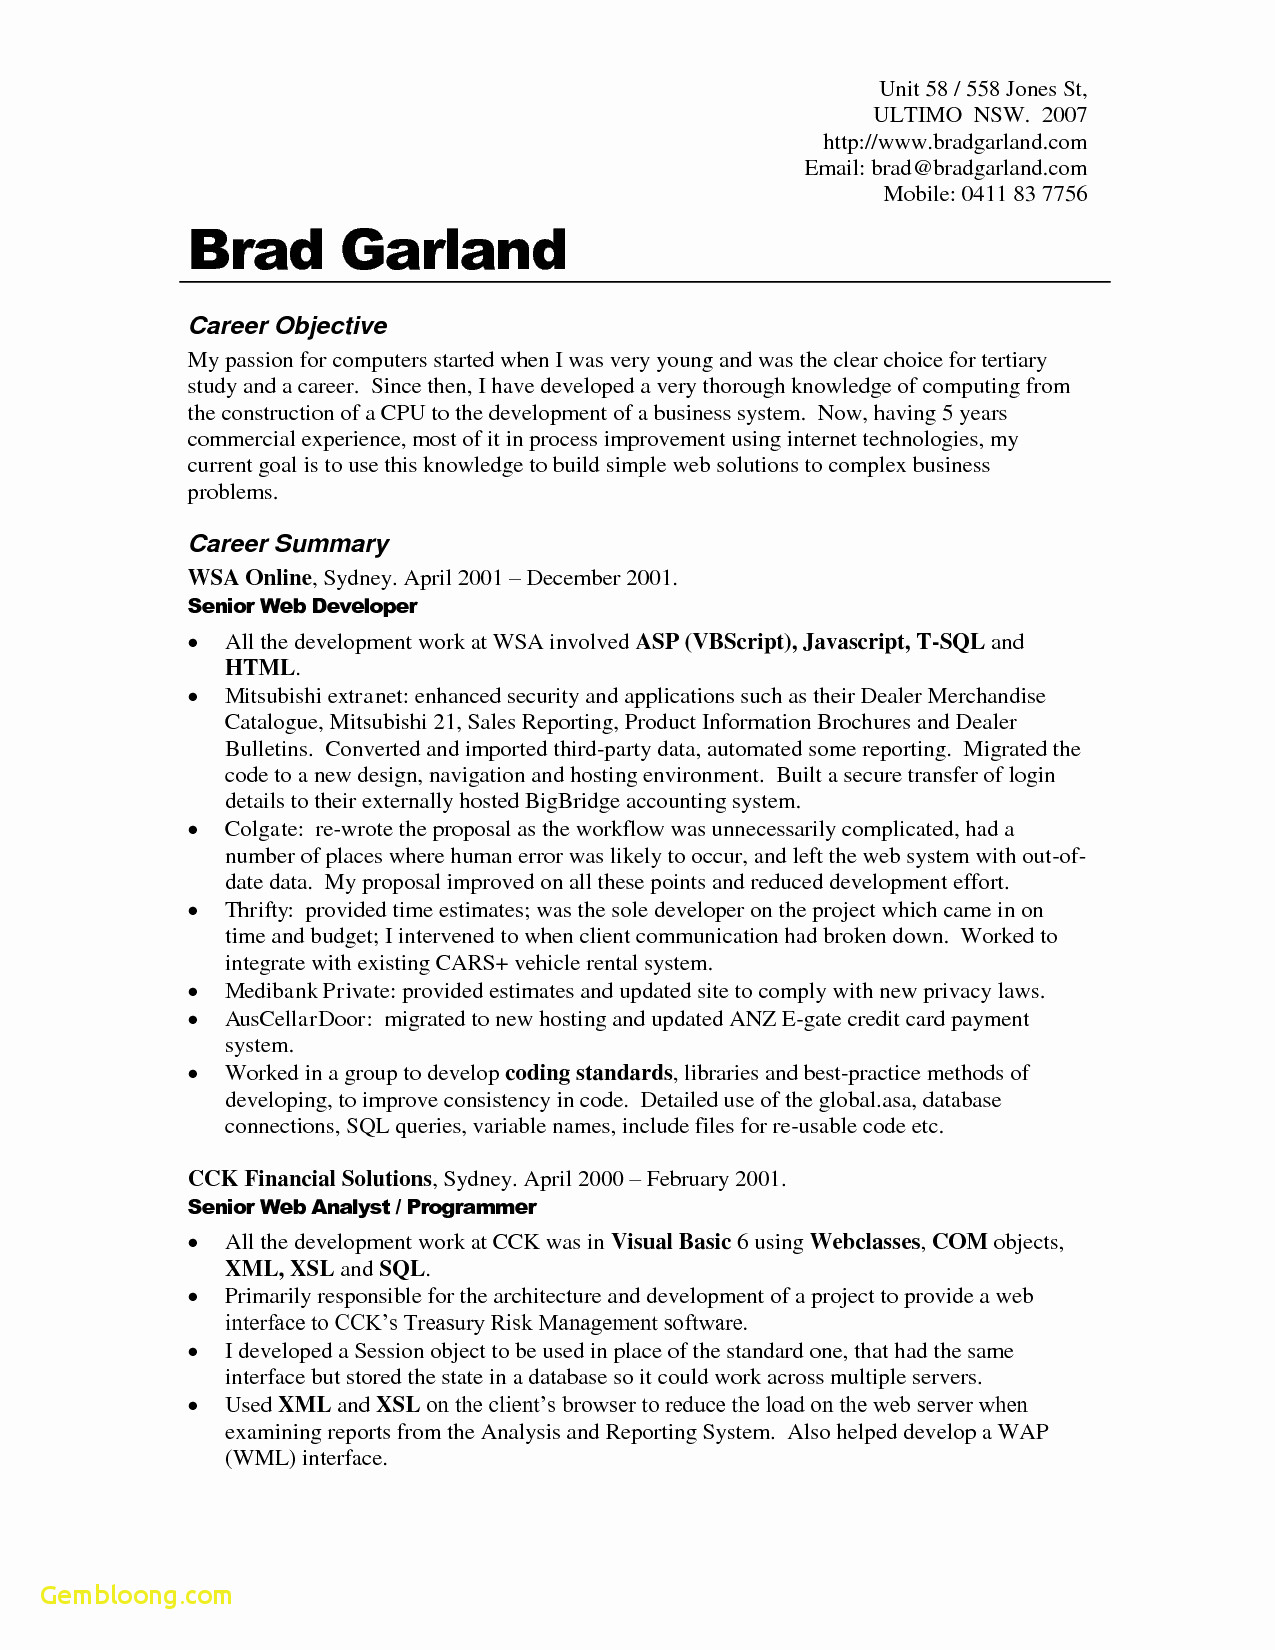 Modern Resume Cover Letter Template - Free Modern Resume Template Download Od Consultant Cover Letter